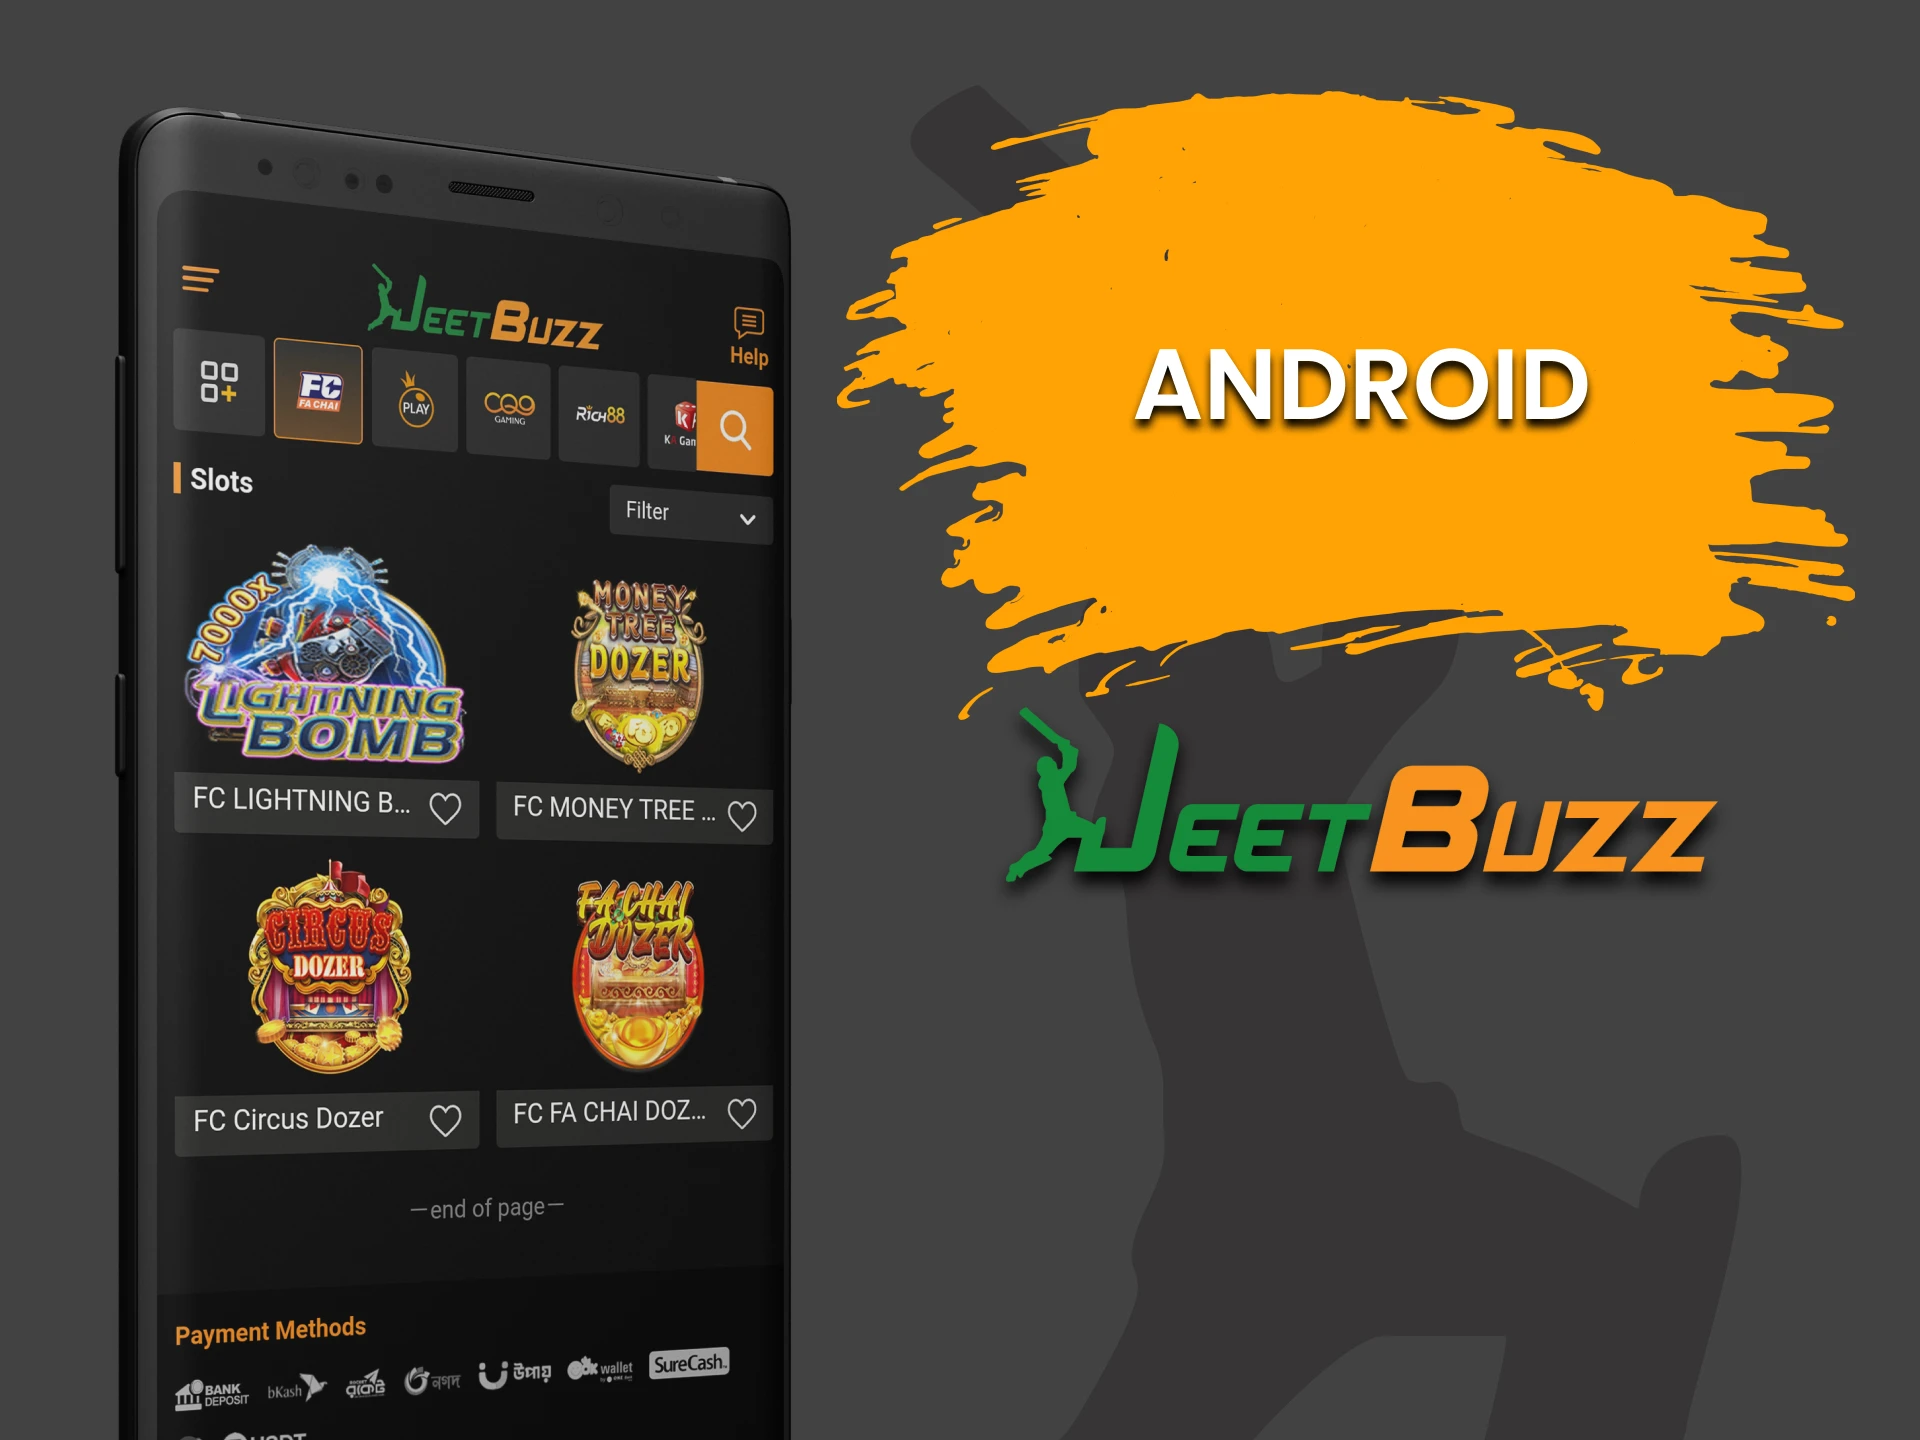 Download the JeetBuzz Android app for Arcade games.